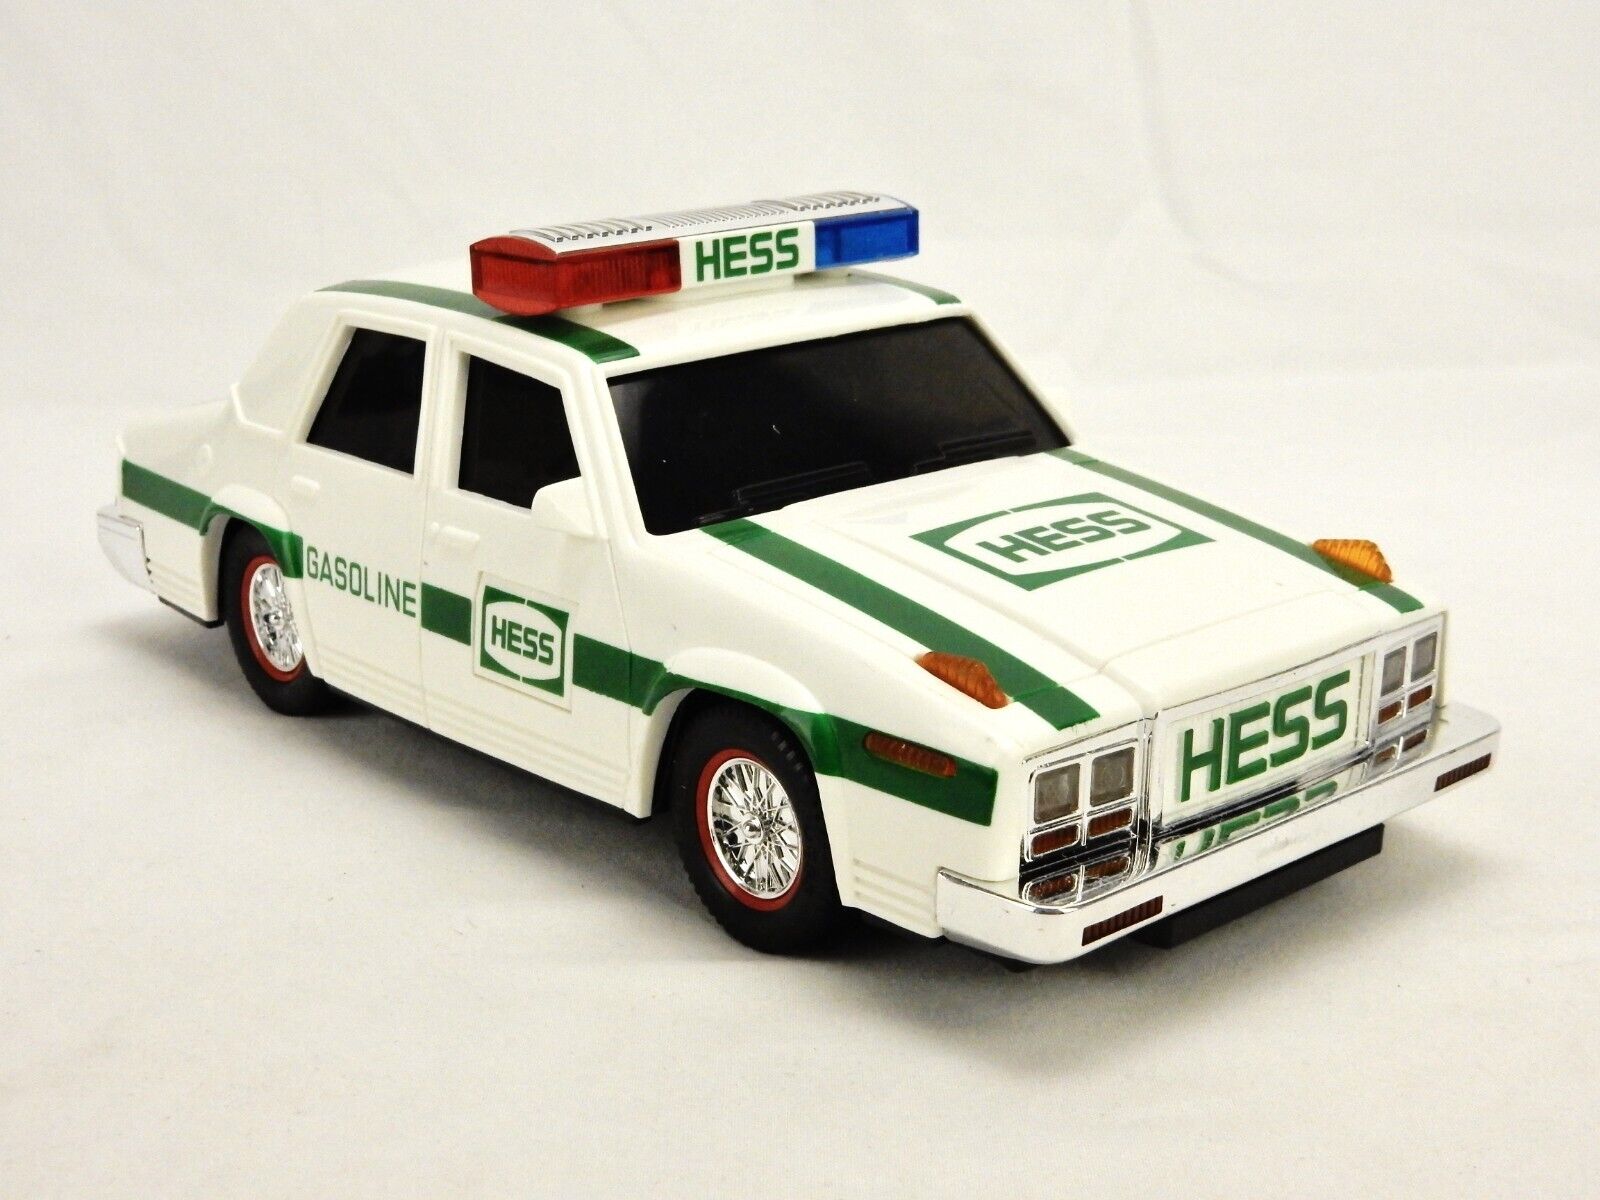 HESS 1993 Die Cast Plastic Toy Patrol Car, Real Lights, Flashers, Siren, DCT-32